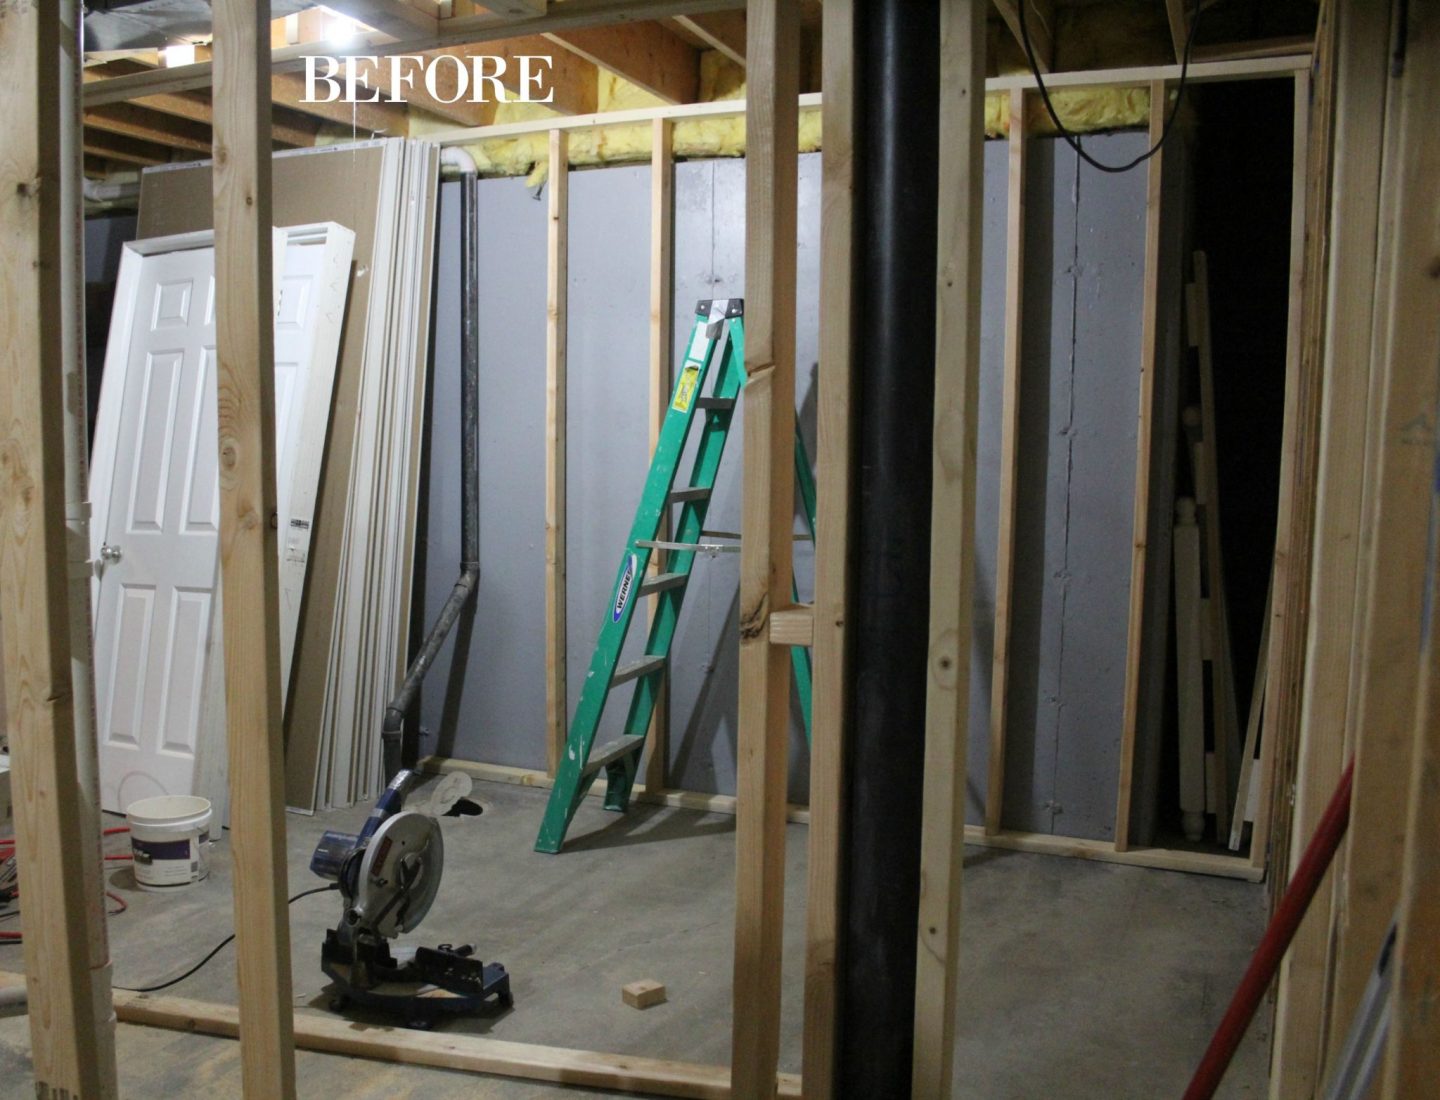 See the before and after transformation of our DIY bathroom in a dark, unpleasant basement! #beforeandafter #DIYhome #bathroomdesign #bathroommakeover